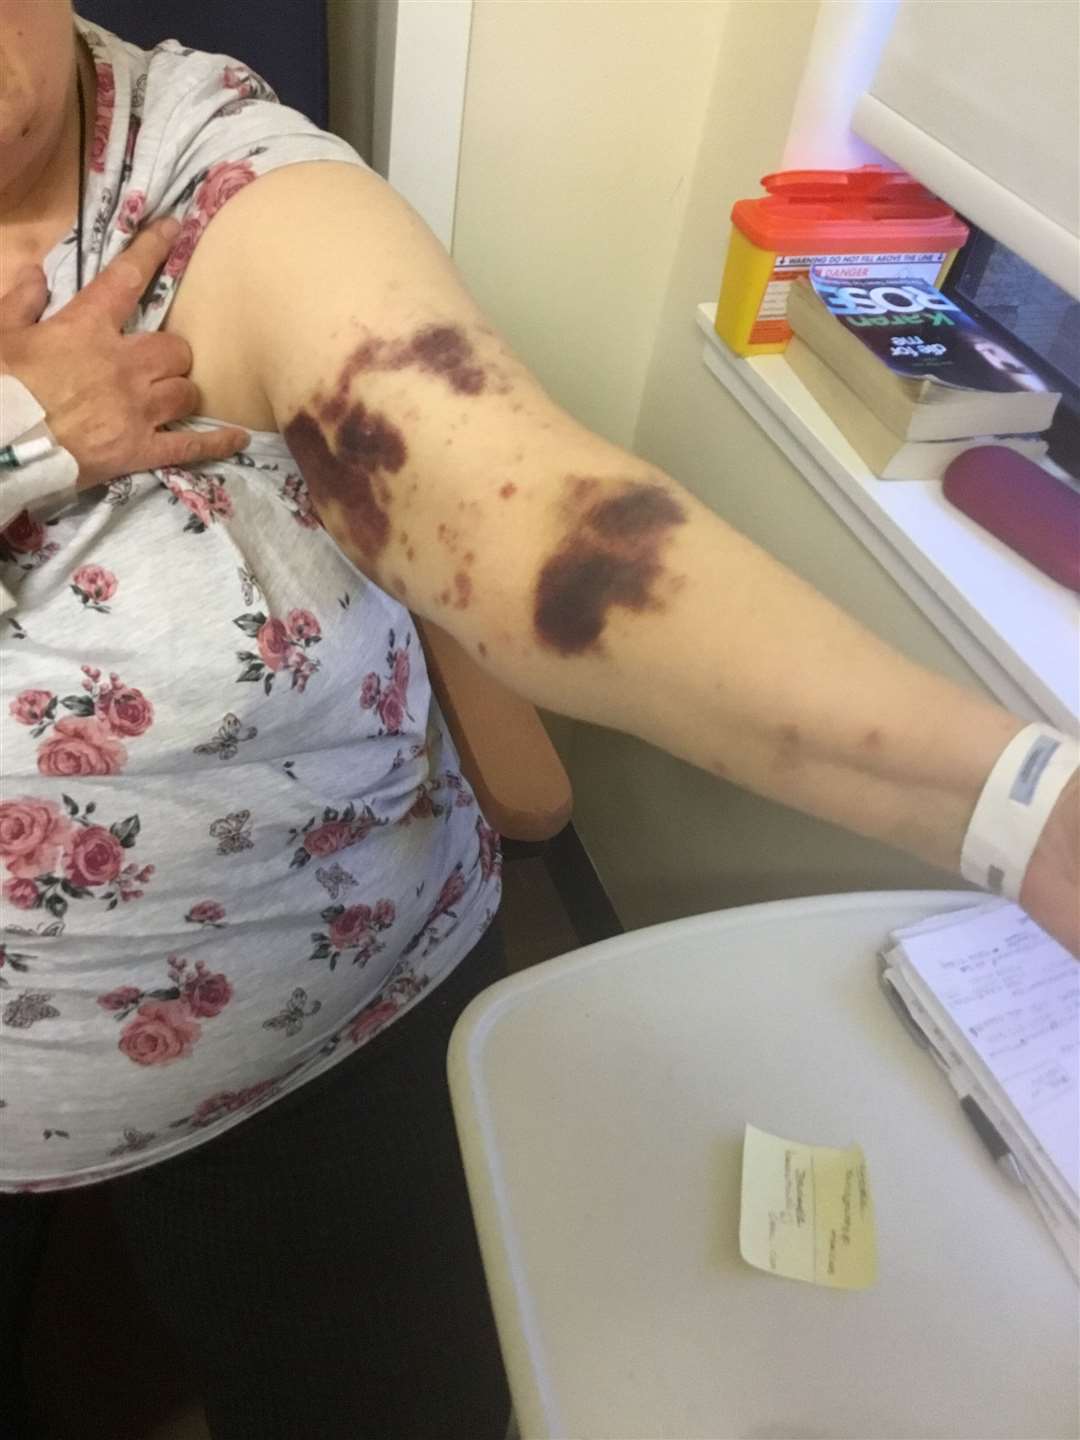 Some of her bruising before treatment.